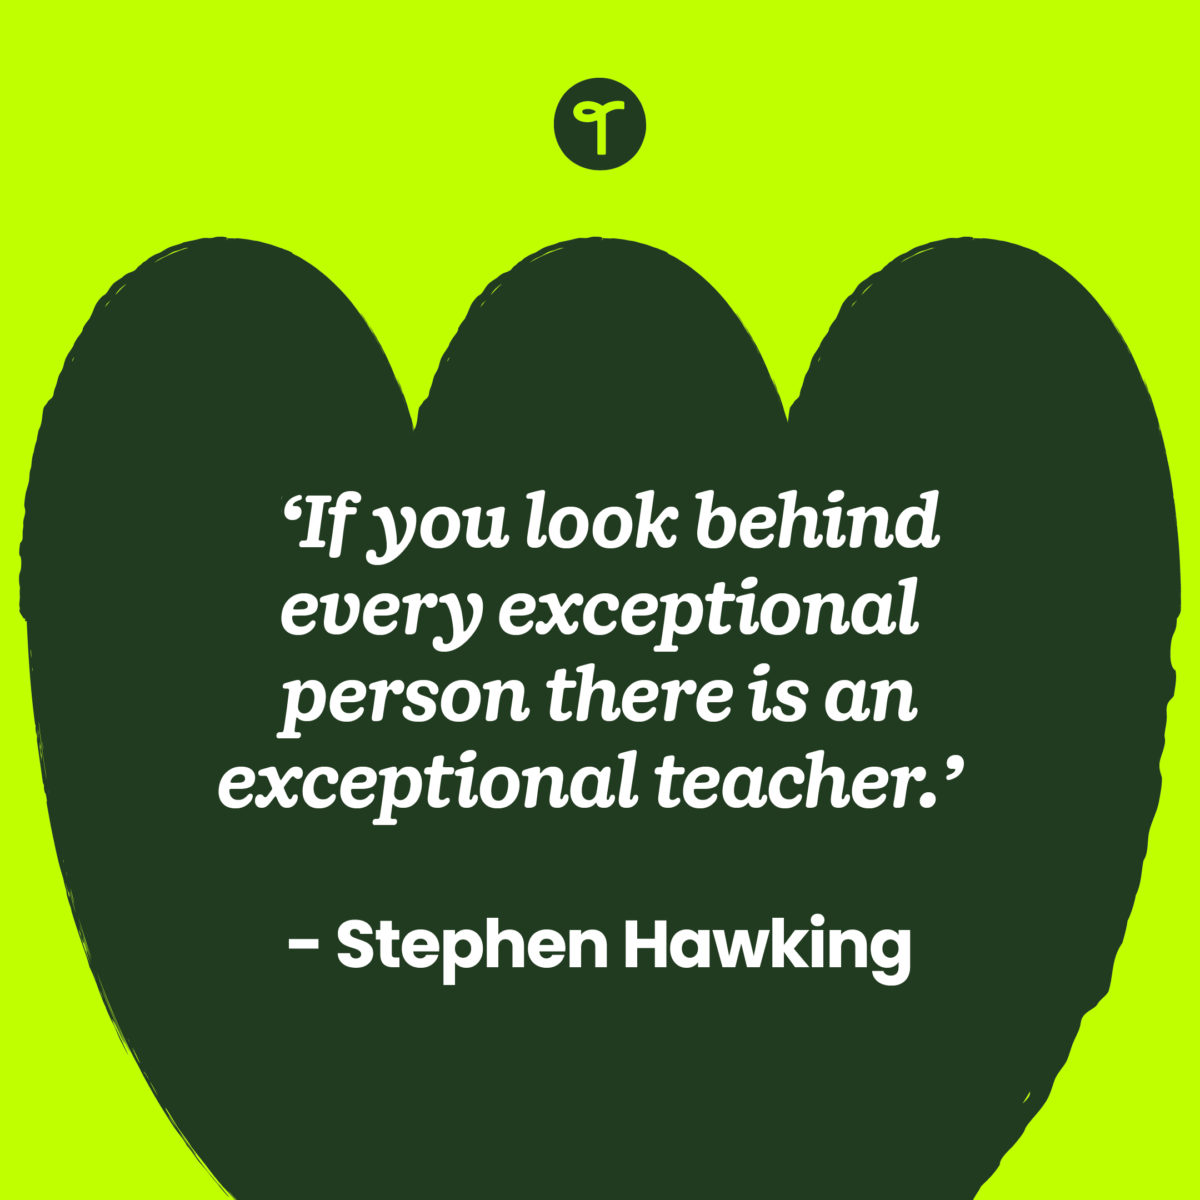 'If you look behind every exceptional person there is an exceptional teacher.' — Stephen Hawking written on a dark green shape with a lime green background